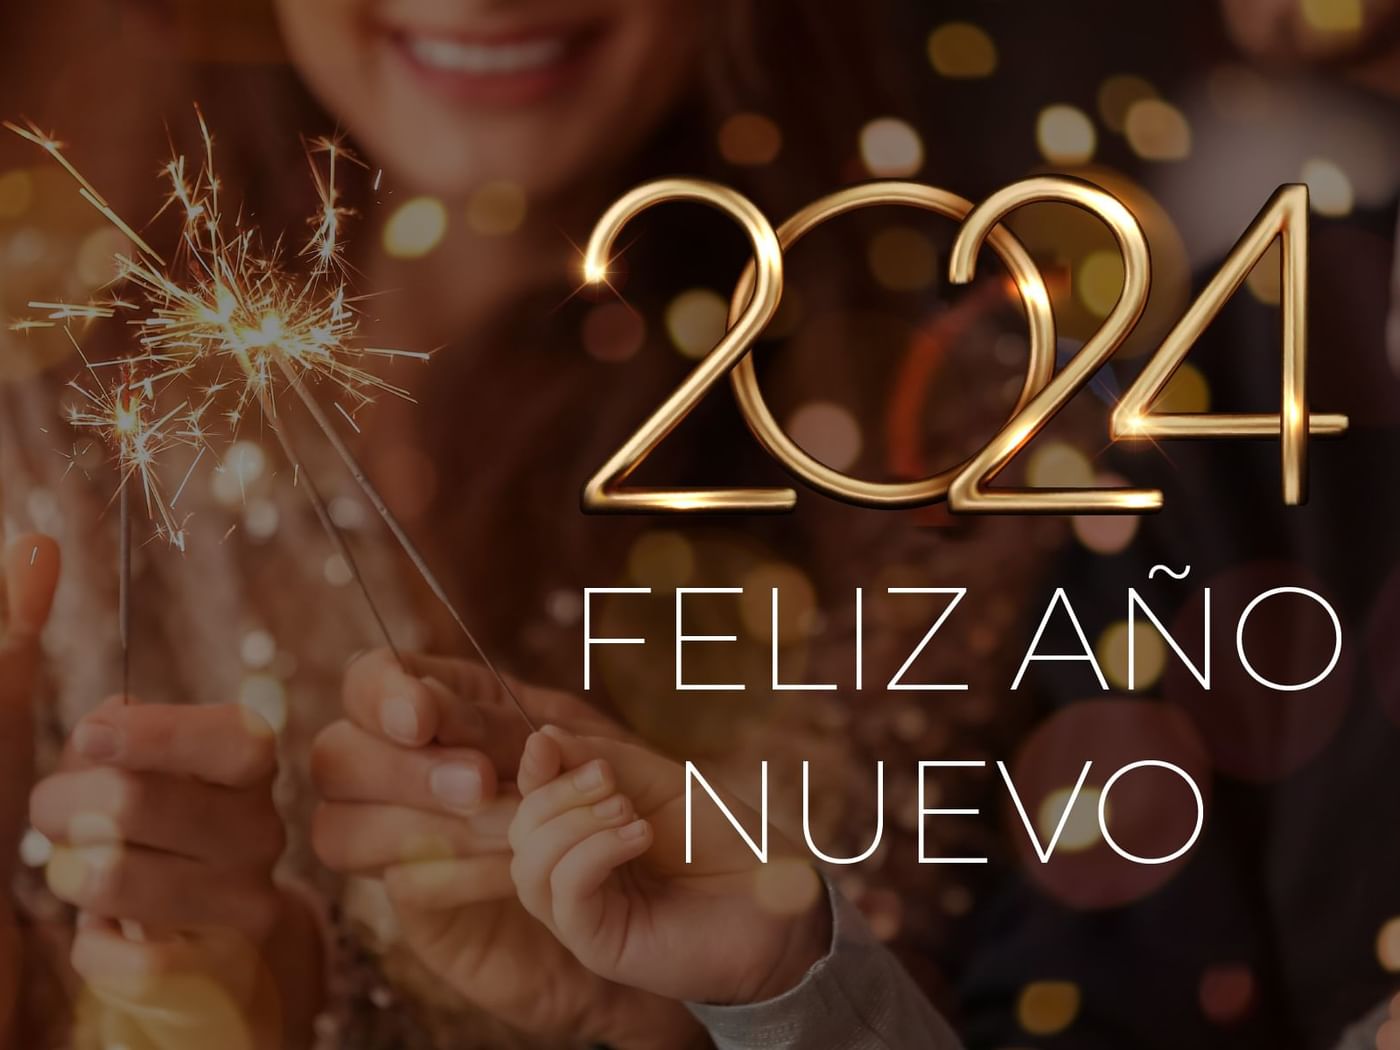 New Year's Eve Dinner banner used at Grand Fiesta Americana Hotel and Resorts